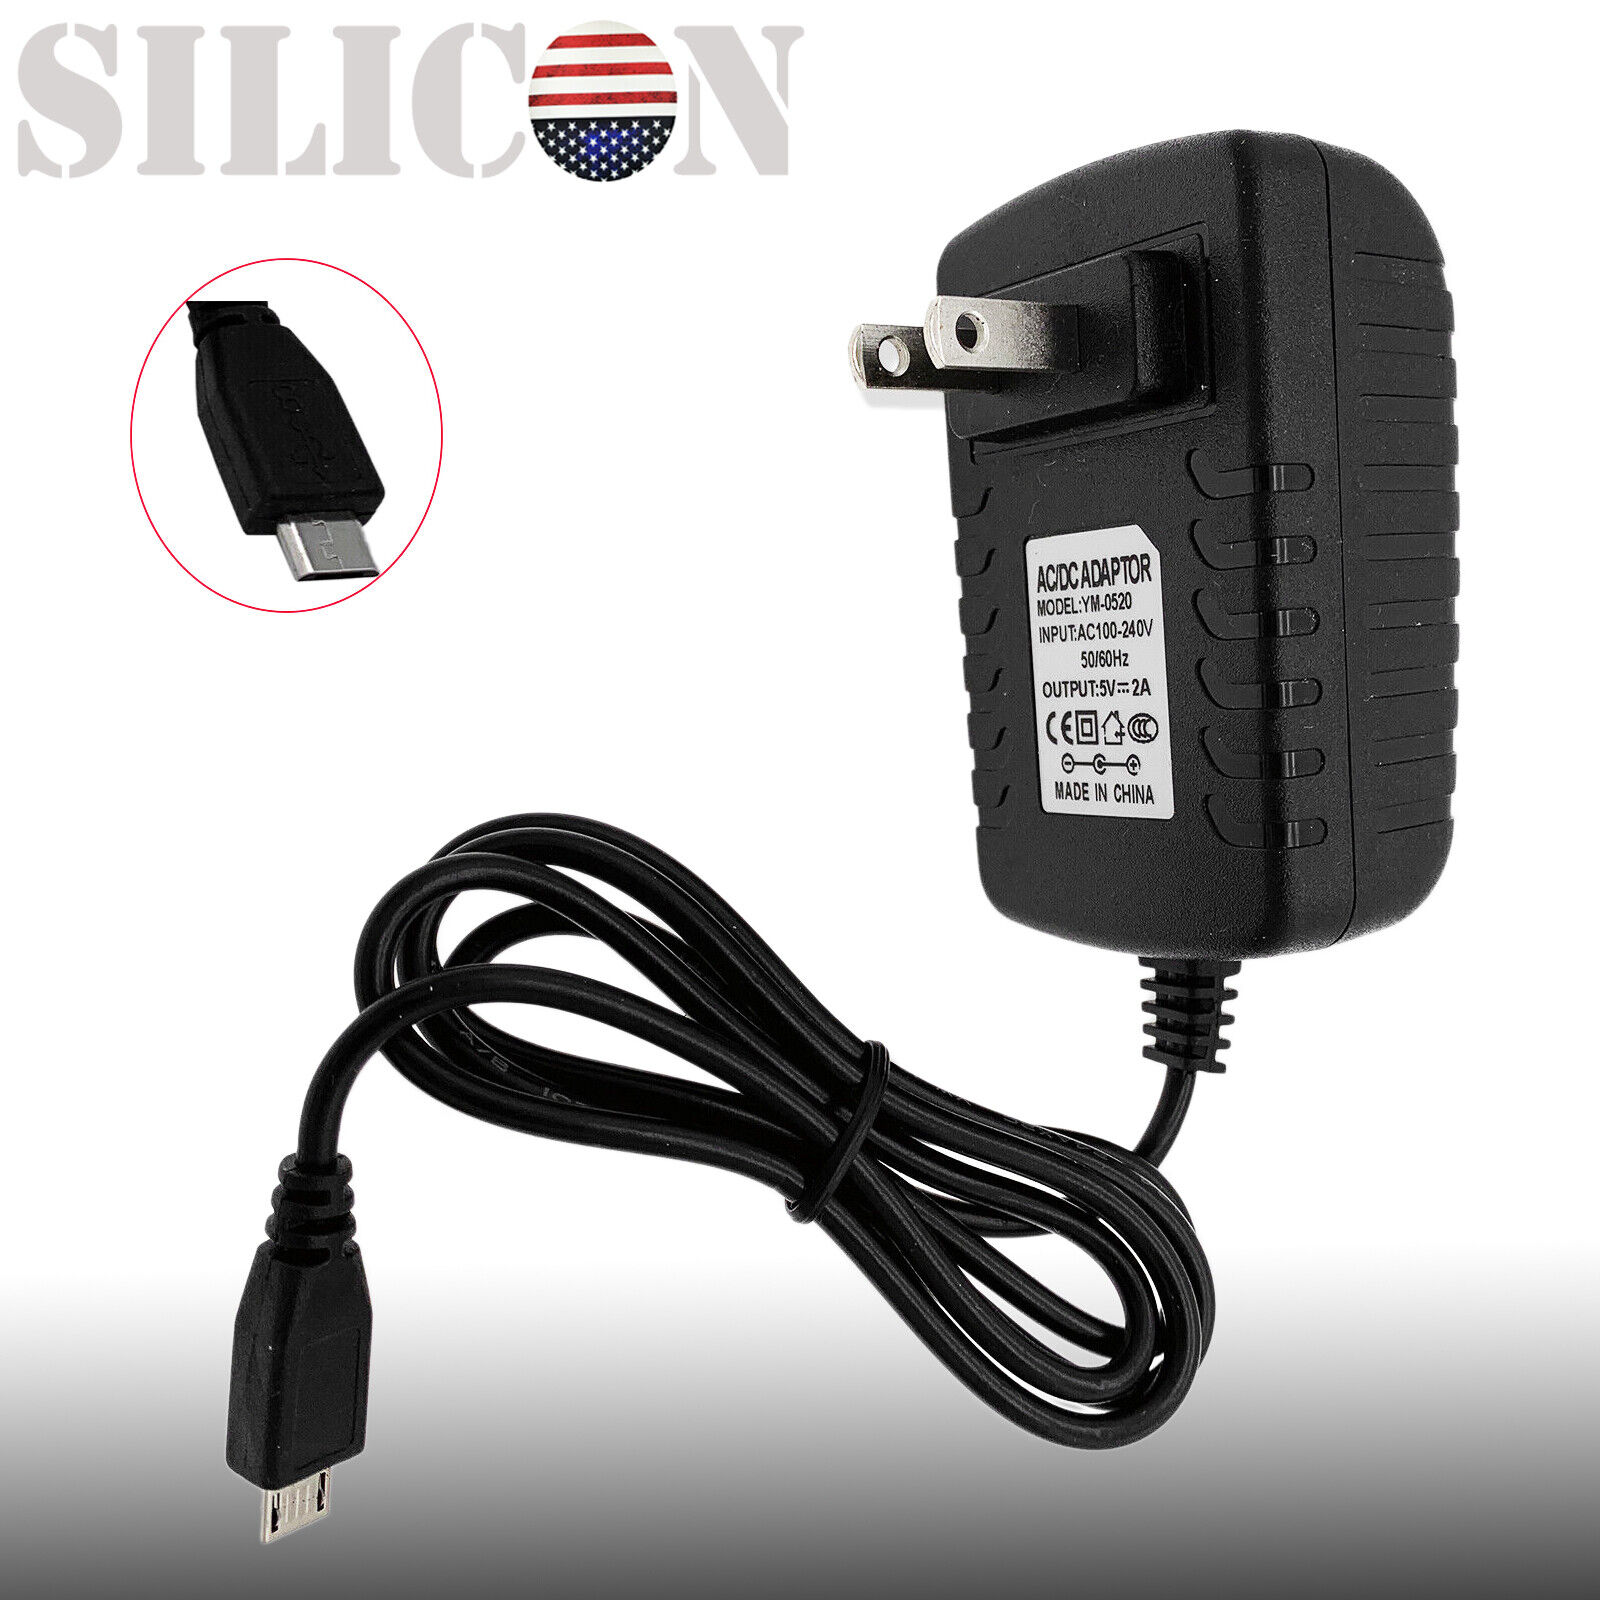 5V 2A AC DC Adapter Wall Charger Power for Verizon Wireless Ellipsis 7 N5V 2A AC DC Adapter Wall Charger Power for Veri